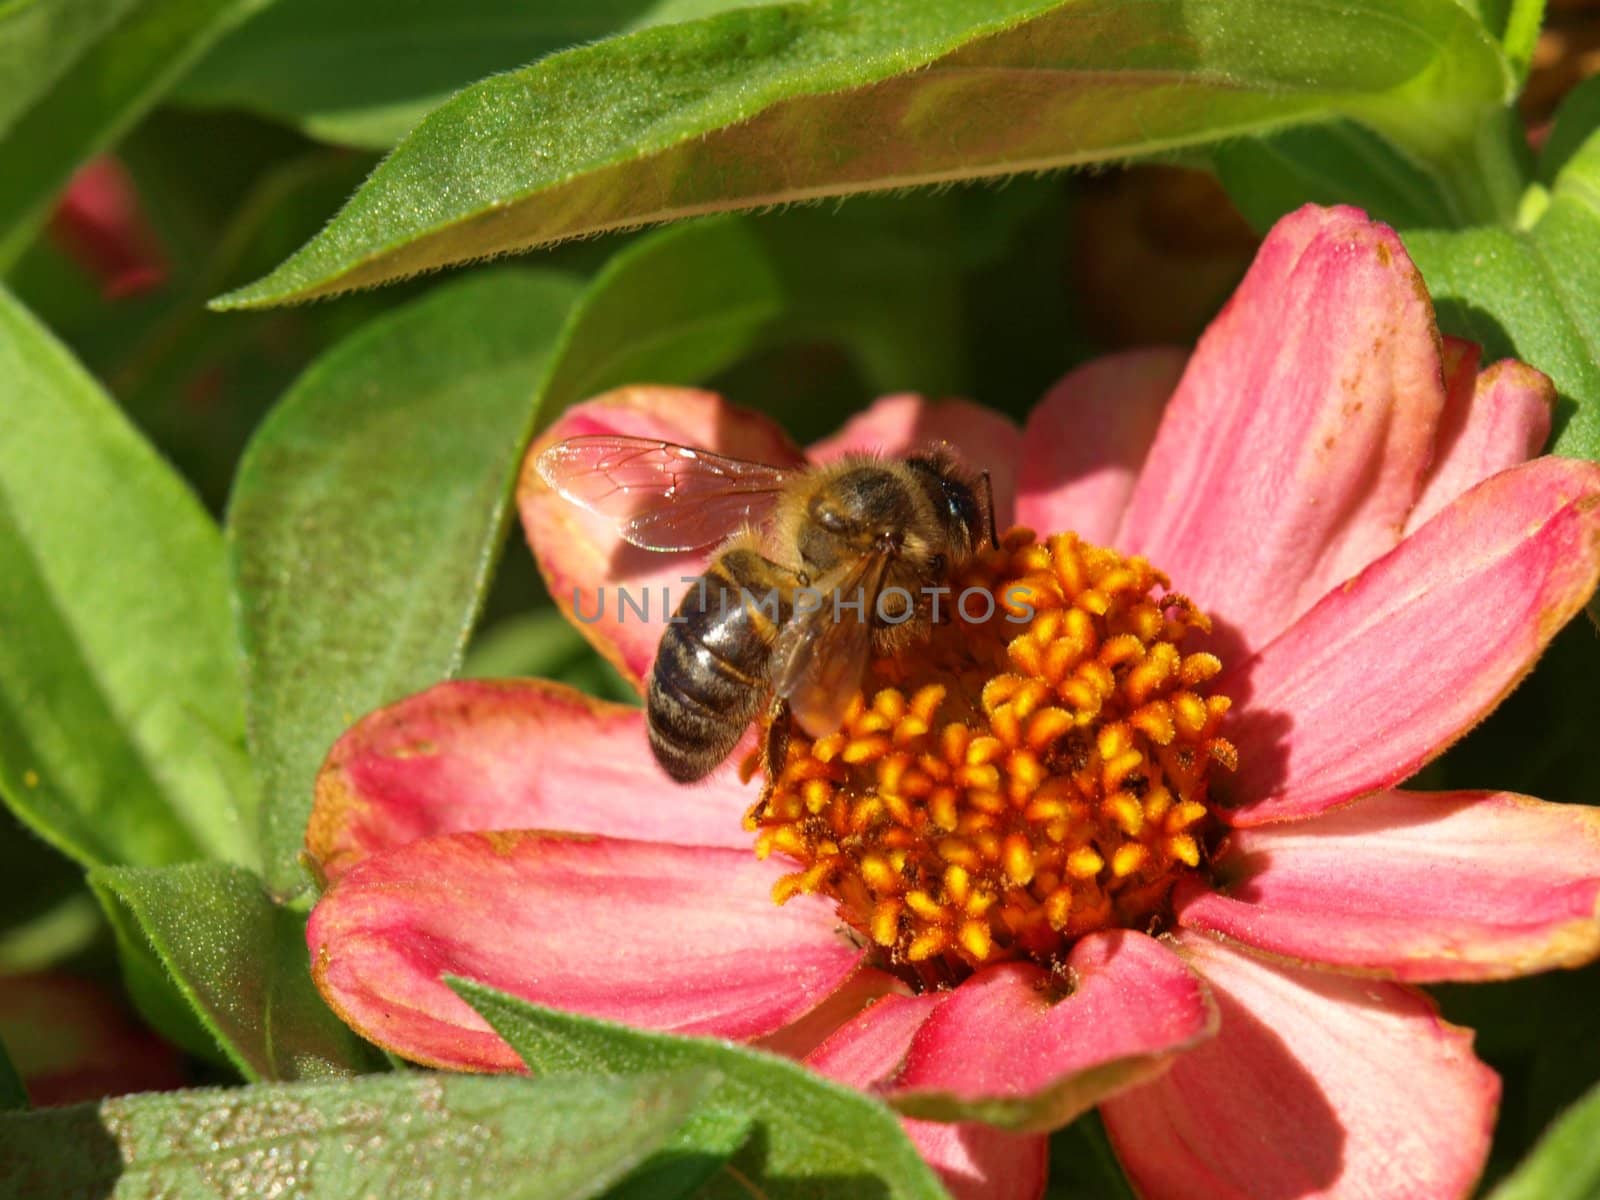 a close-up image of a bee working on a flower